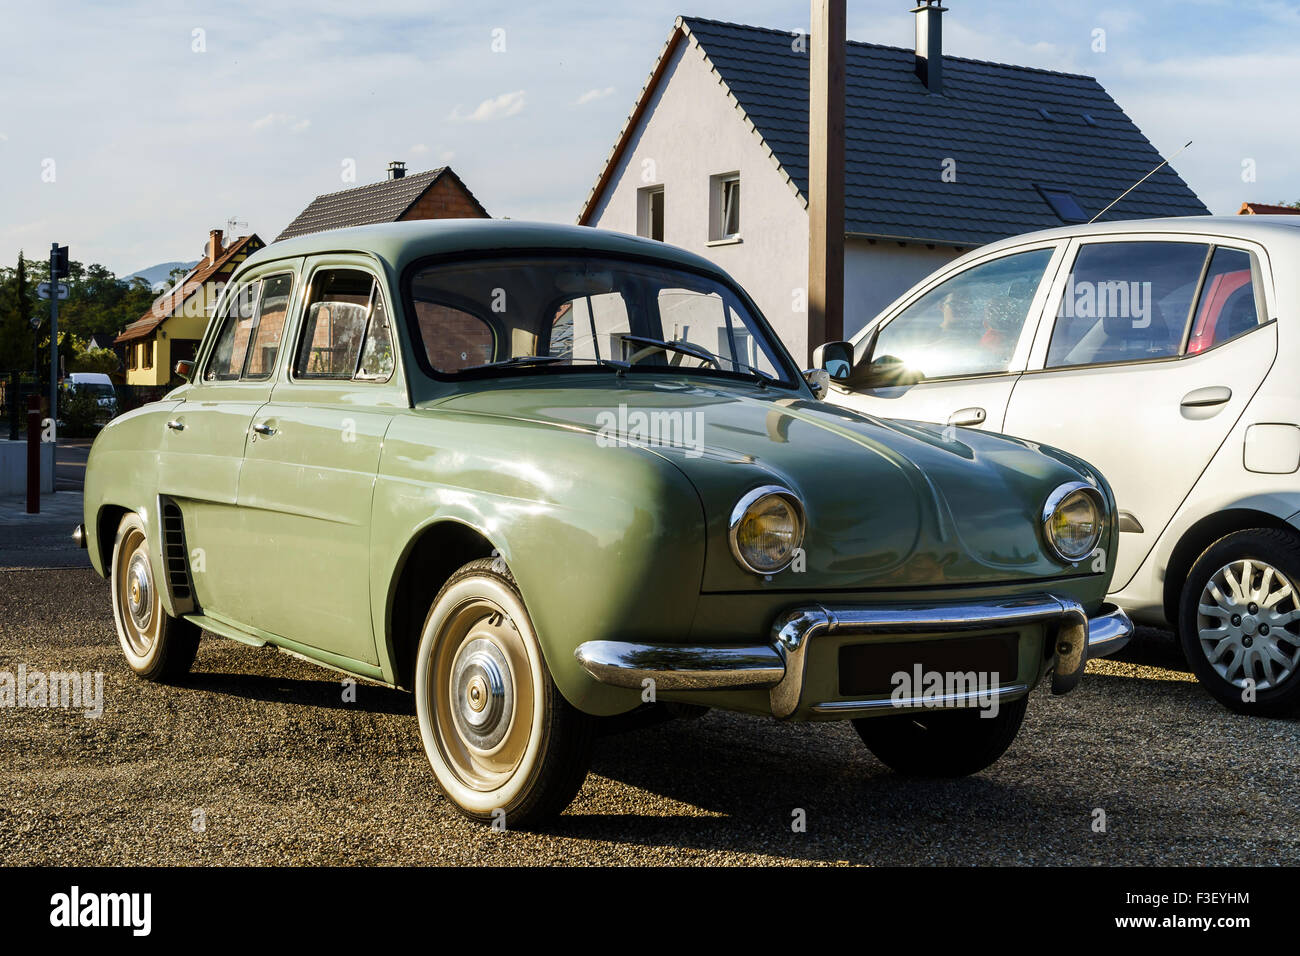 Funny retro french car view, Alsace, France Stock Photo